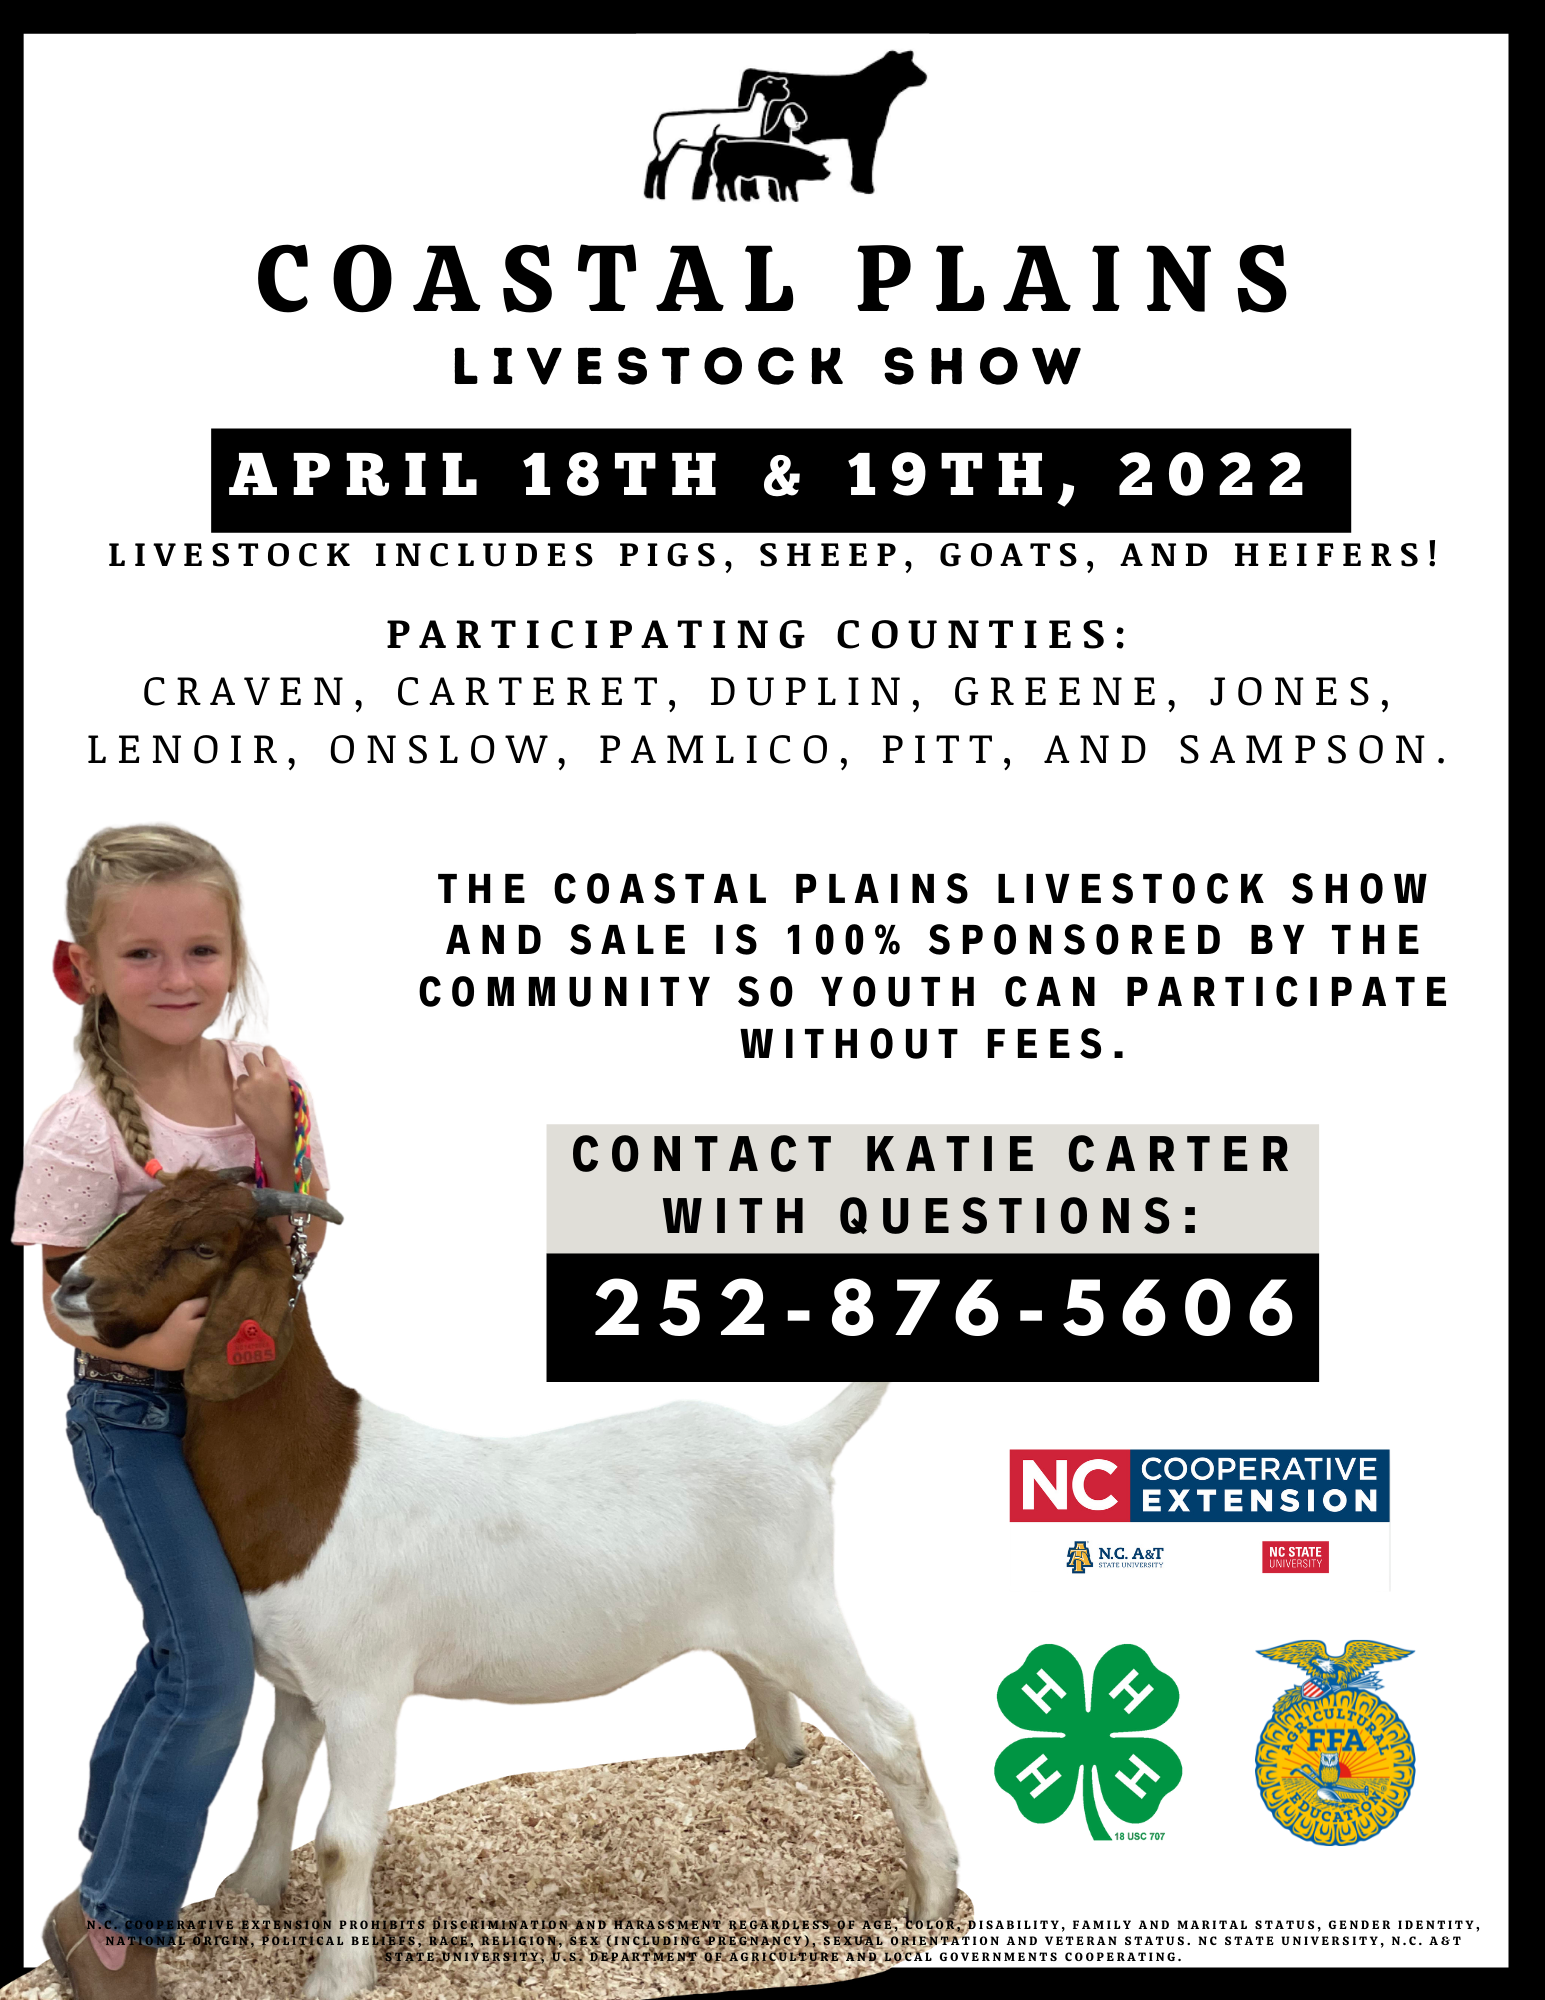 Coastal Plains Livestock Show: April 18th & 19th, 2022. Livestock includes pigs, sheep, goats, and heifers! Participating Counties: Craven, Carteret, Duplin, Greene, Jones, Lenoir, Onslow, Pamlico, Pitt, and Sampson. The Coastal Plains Livestock Show and Sale is 100% sponsored by the community so youth can participate without fees. Contact Katie Carter with questions: 252-876-5606